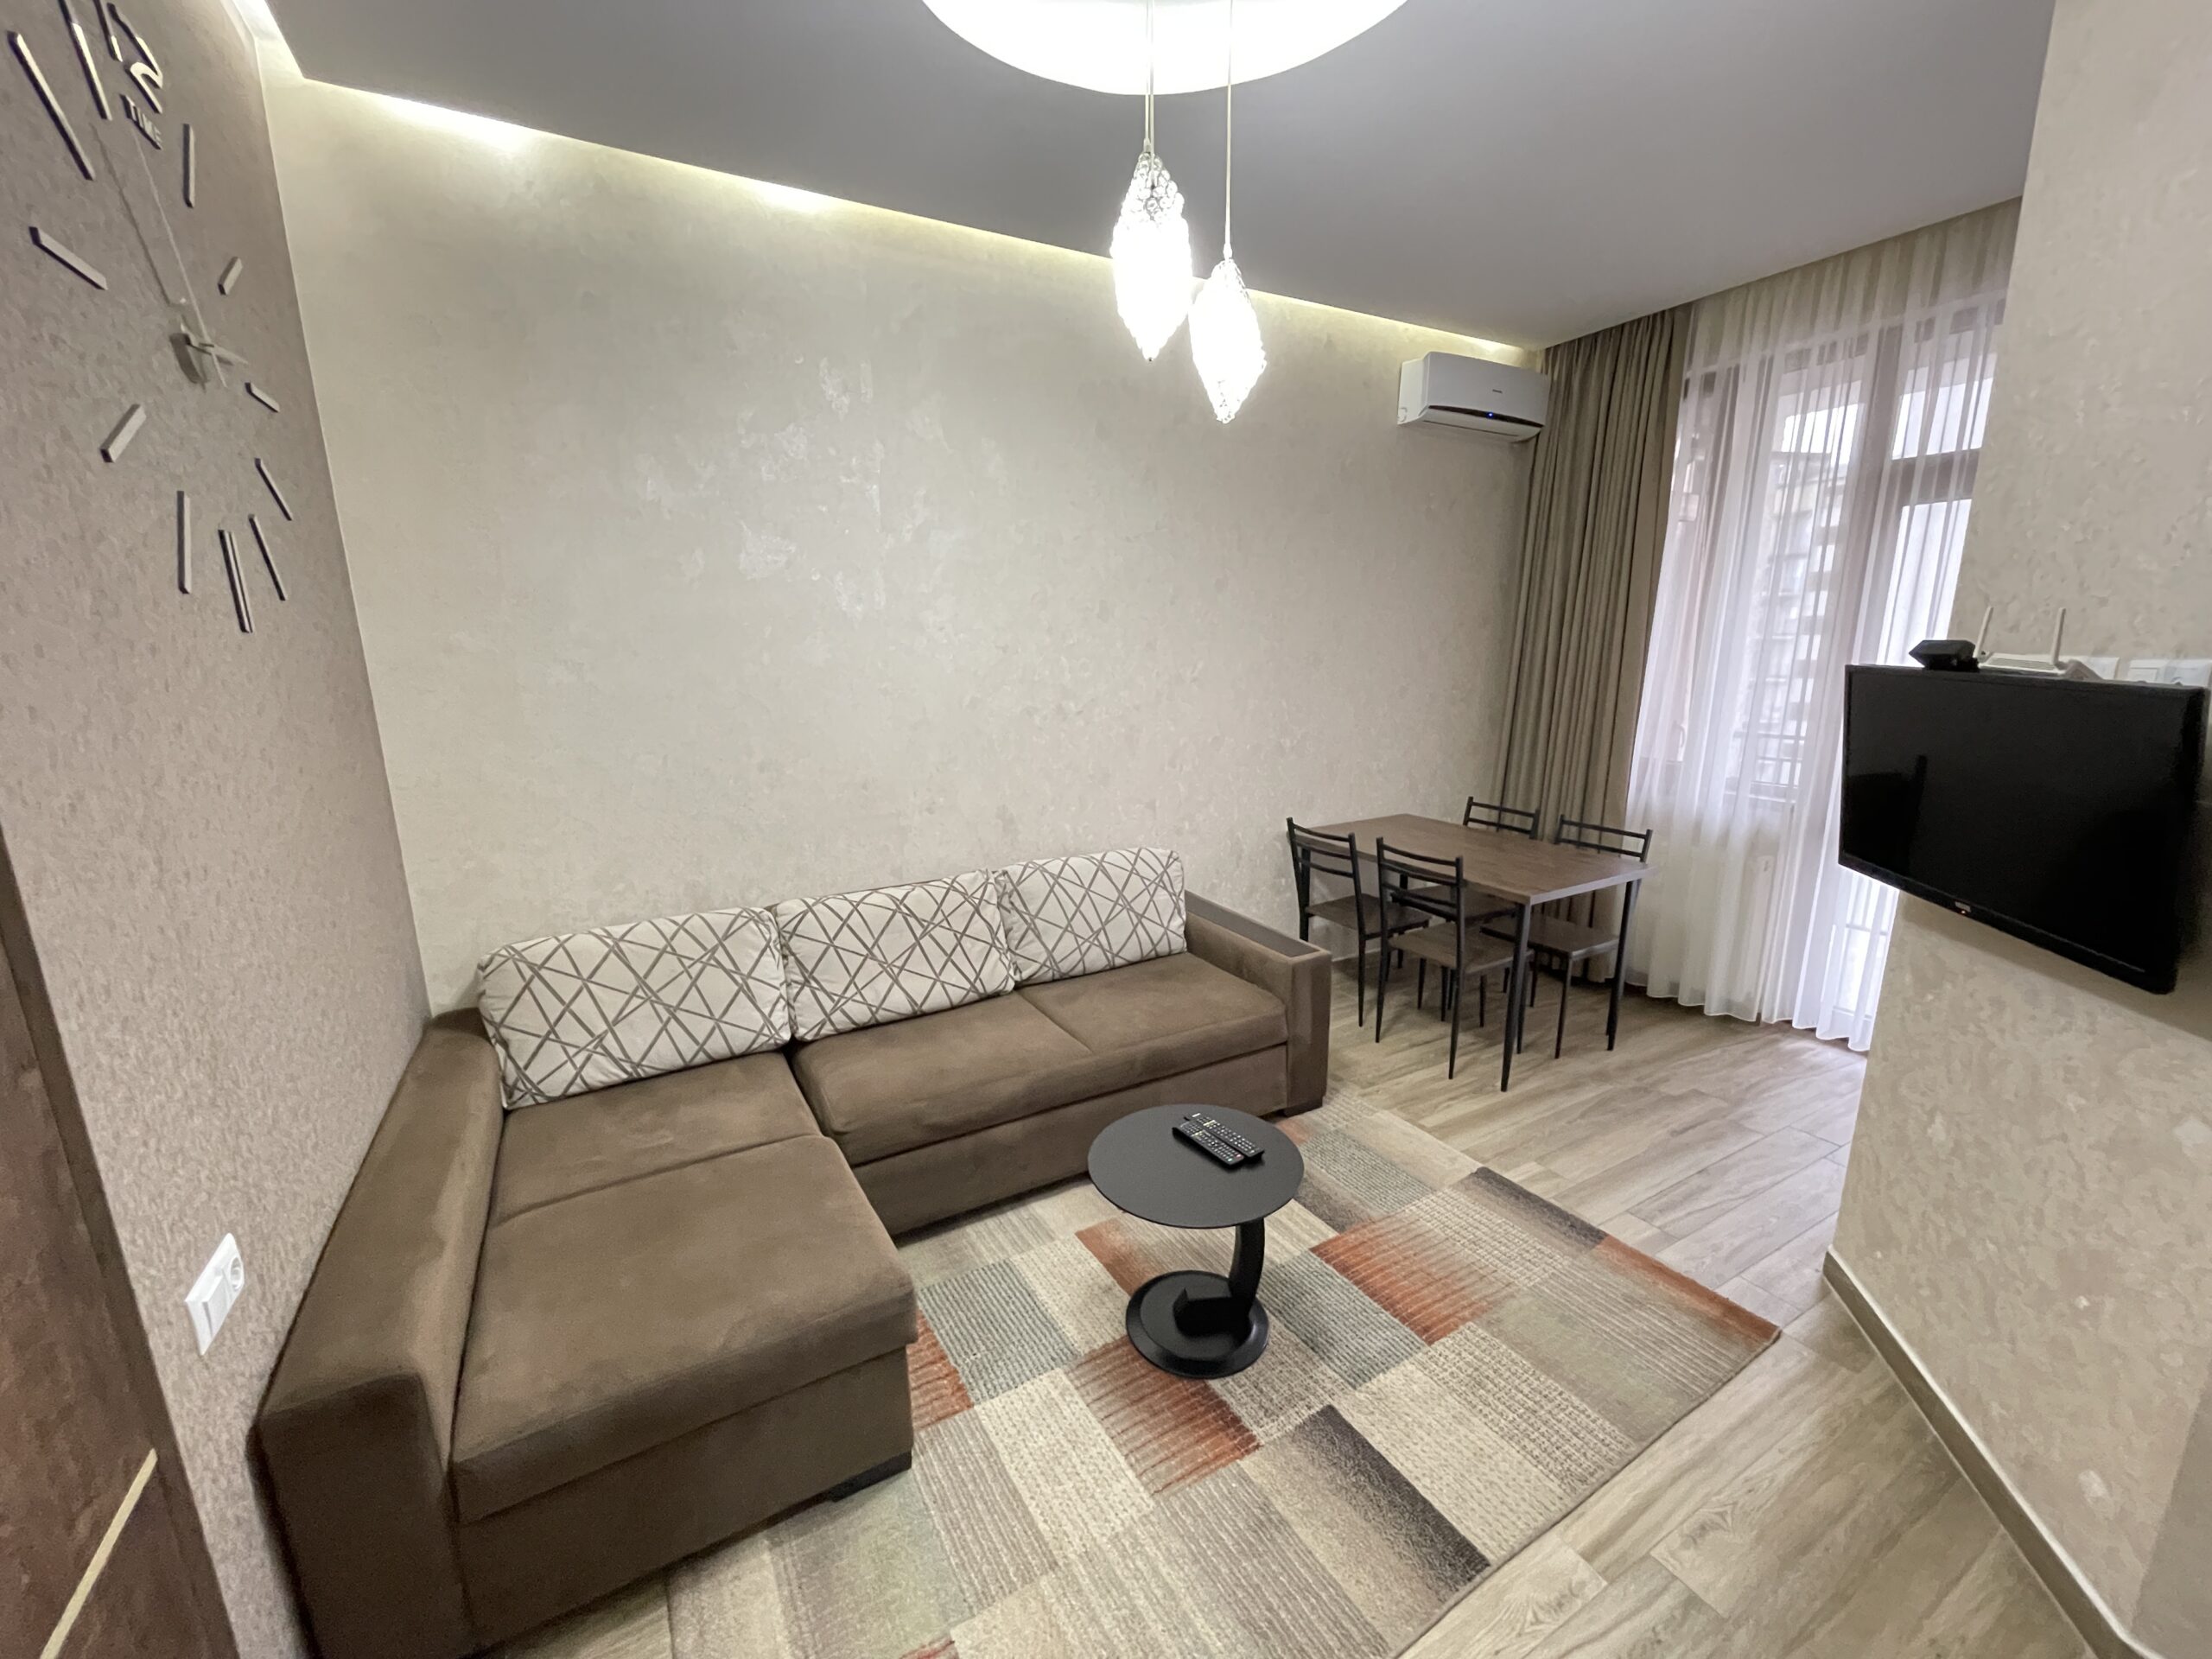 2-Room Apartment For Rent near the City Mall